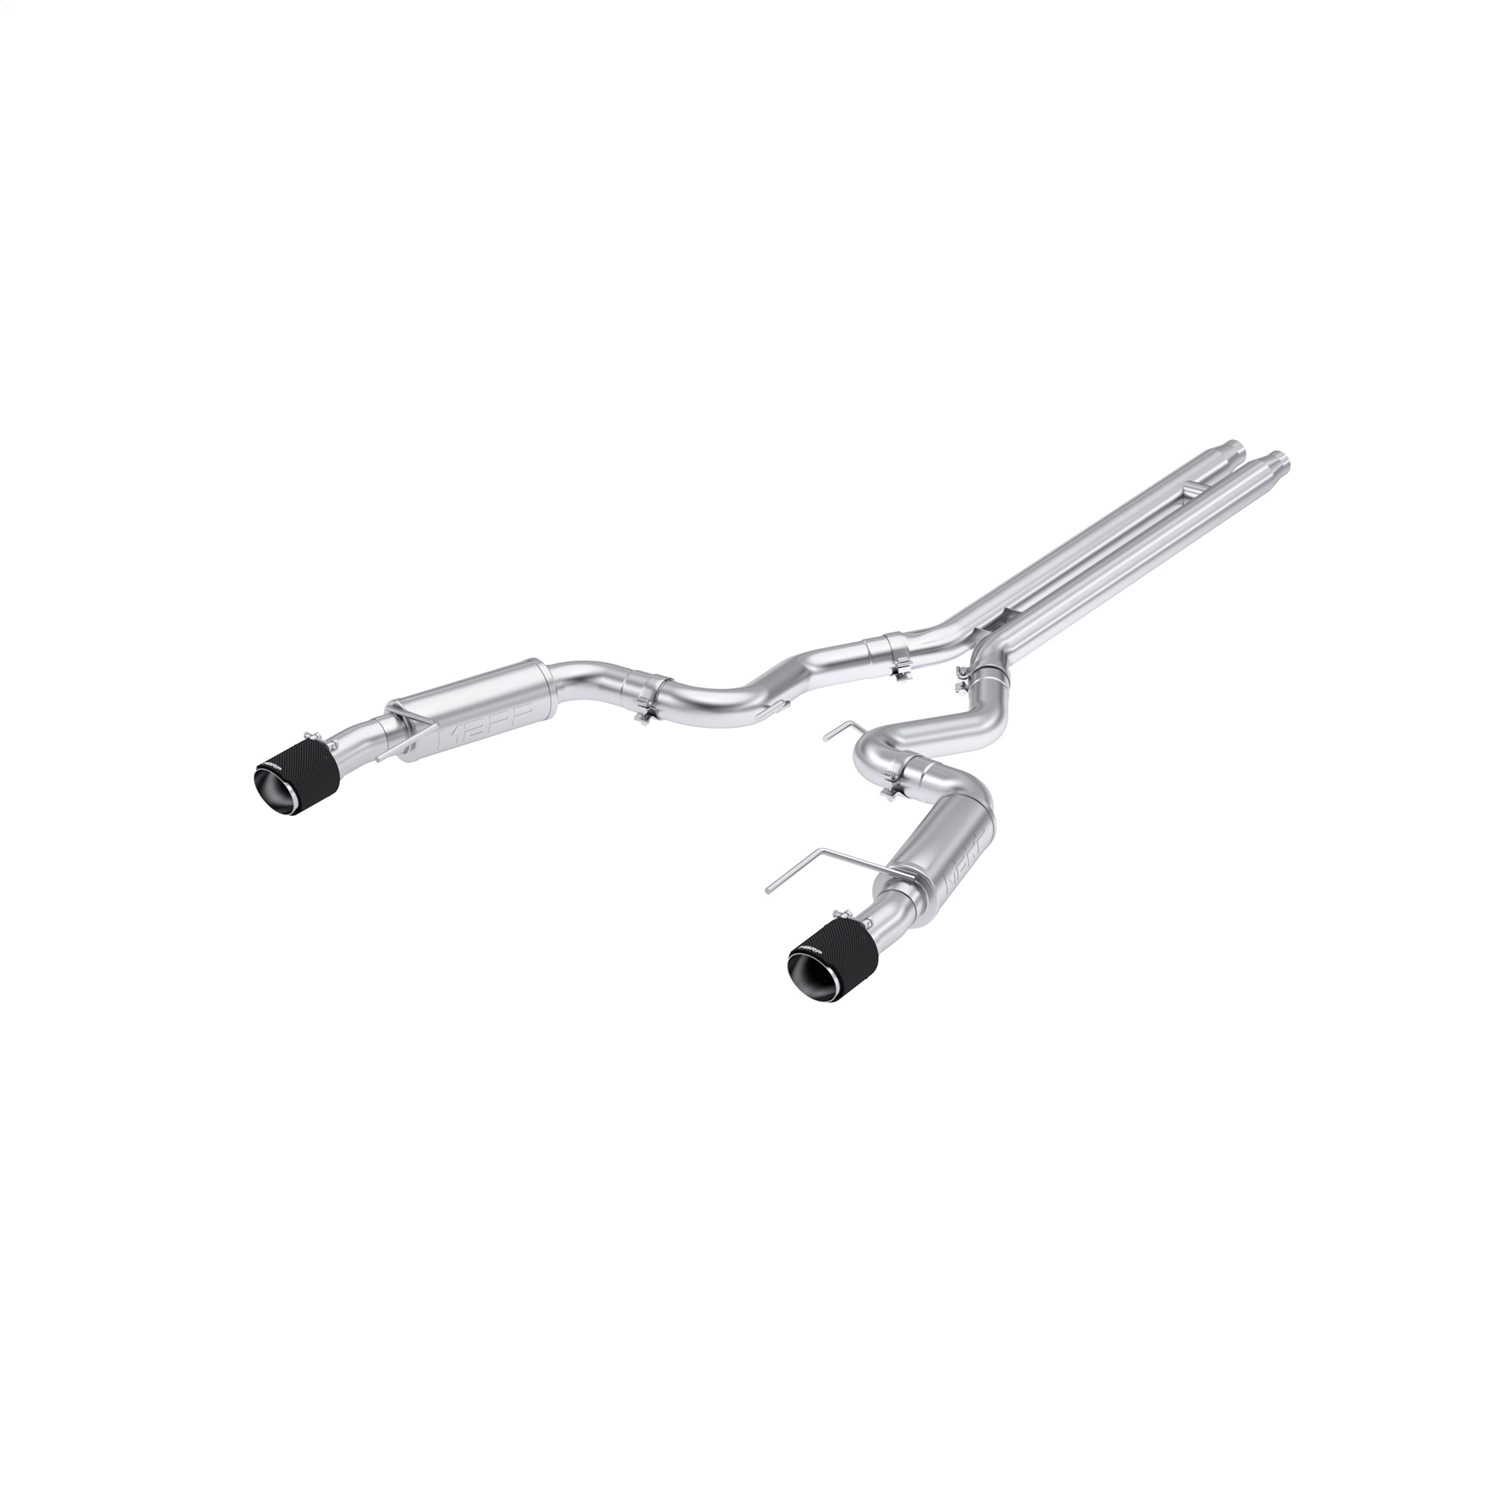 MBRP Exhaust S72533CF Armor Pro Cat Back Exhaust System Fits 24 Mustang